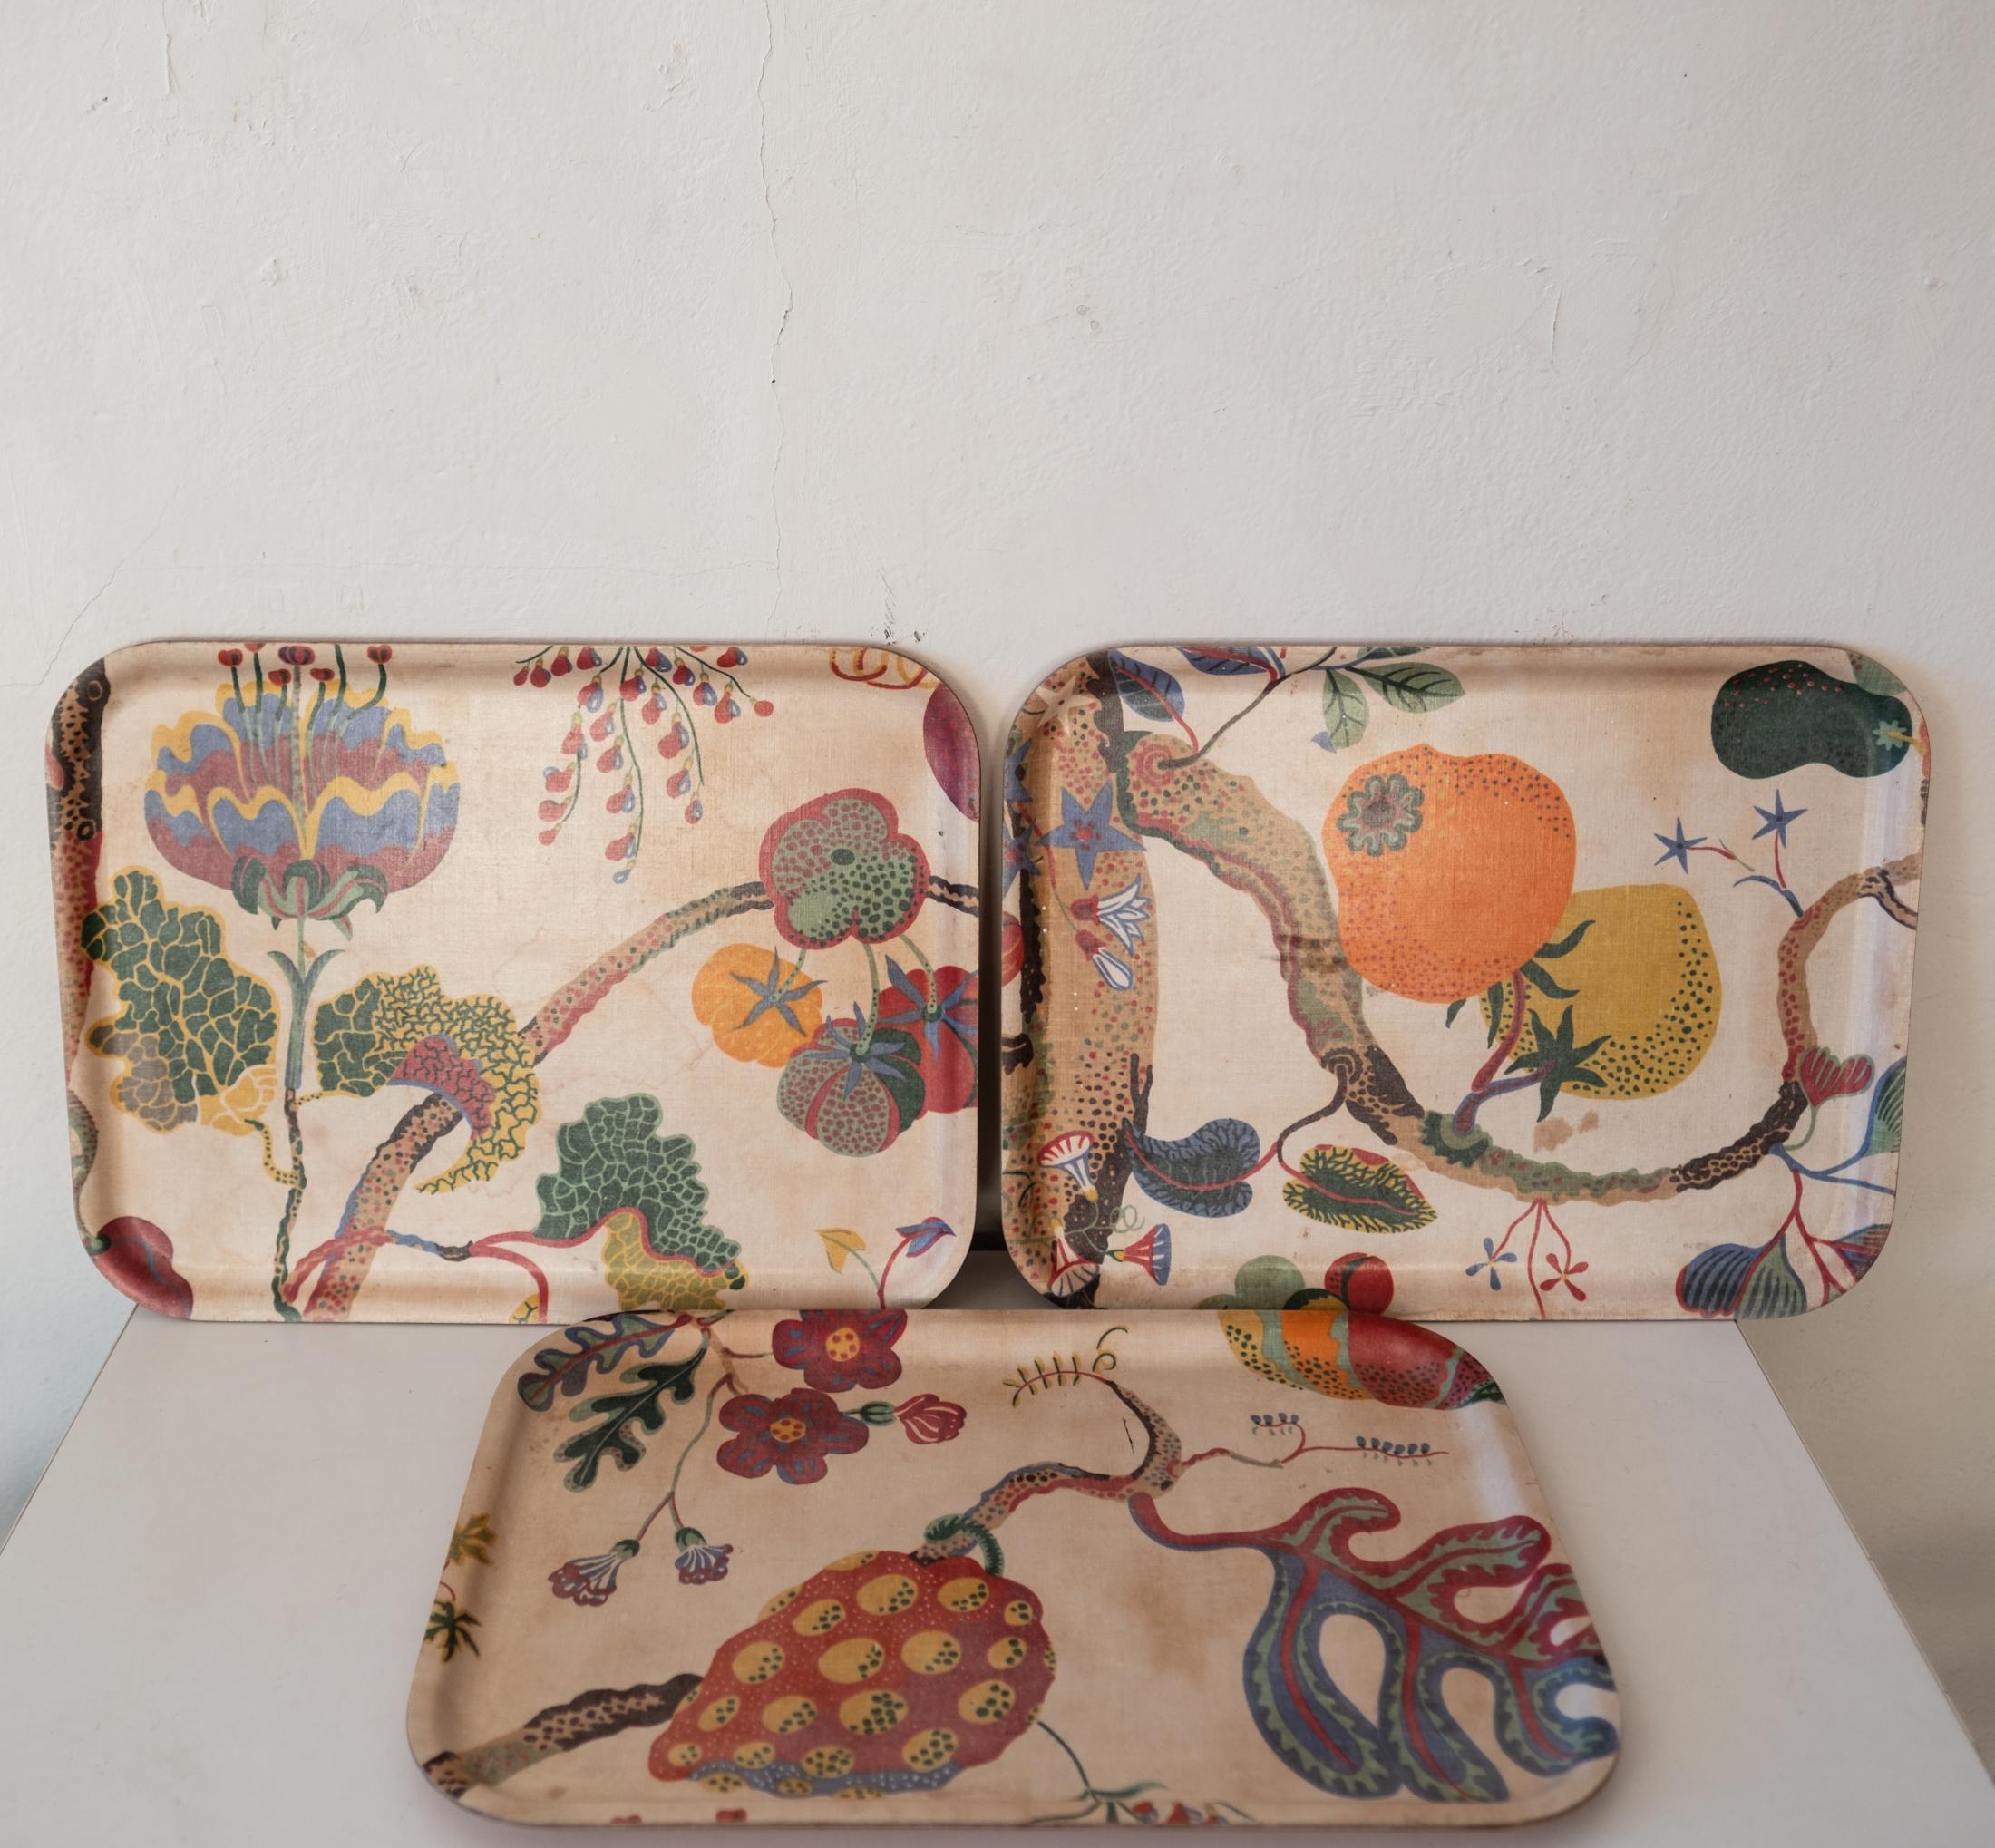 A set of three vintage serving trays by Josef Frank for Svenskt Tenn. Sweden, 1960s

Classic textile design by Josef Frank over molded plywood tray. The trays are produced by Swedish interior design house and manufacturer Svenskt Tenn, Stockholm.